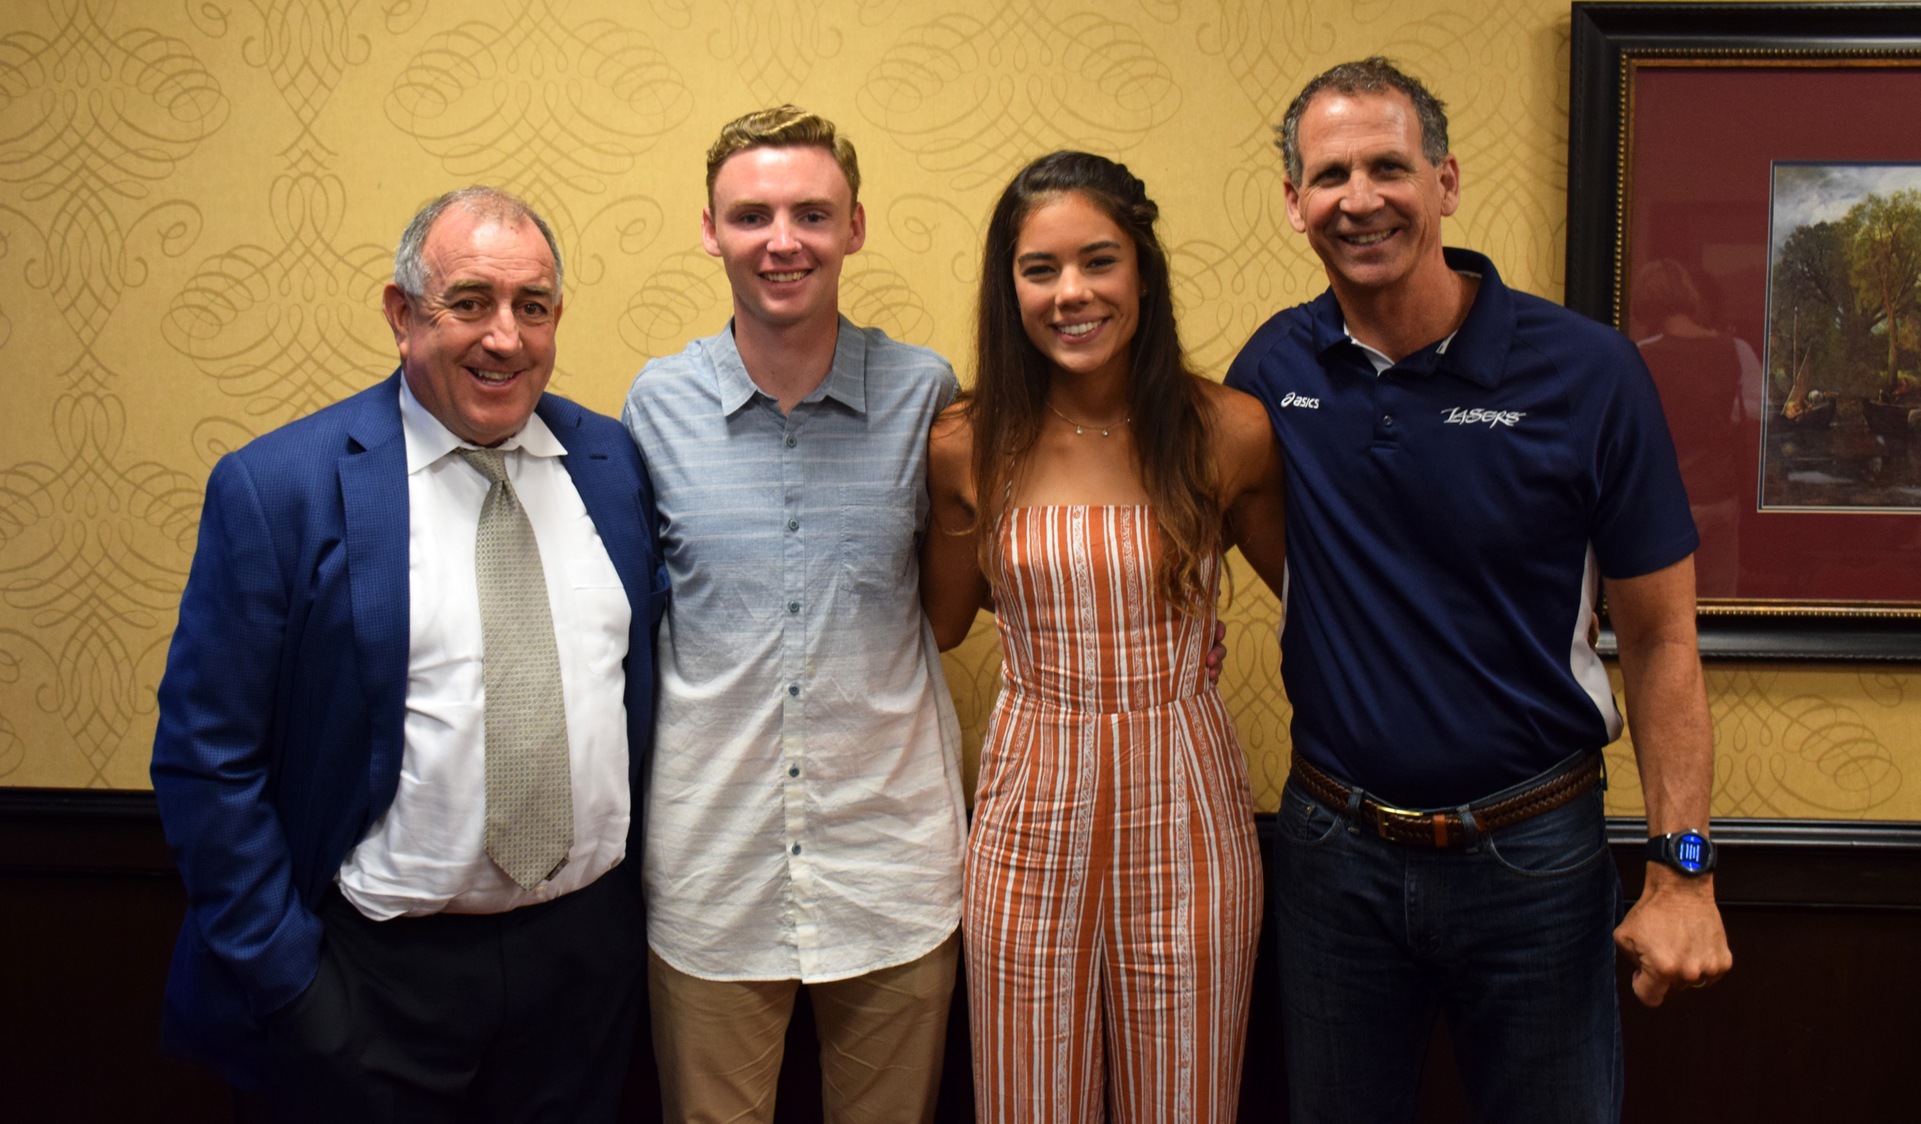 Renata Bath and Grant Joyce are IVC's scholar athletes of year